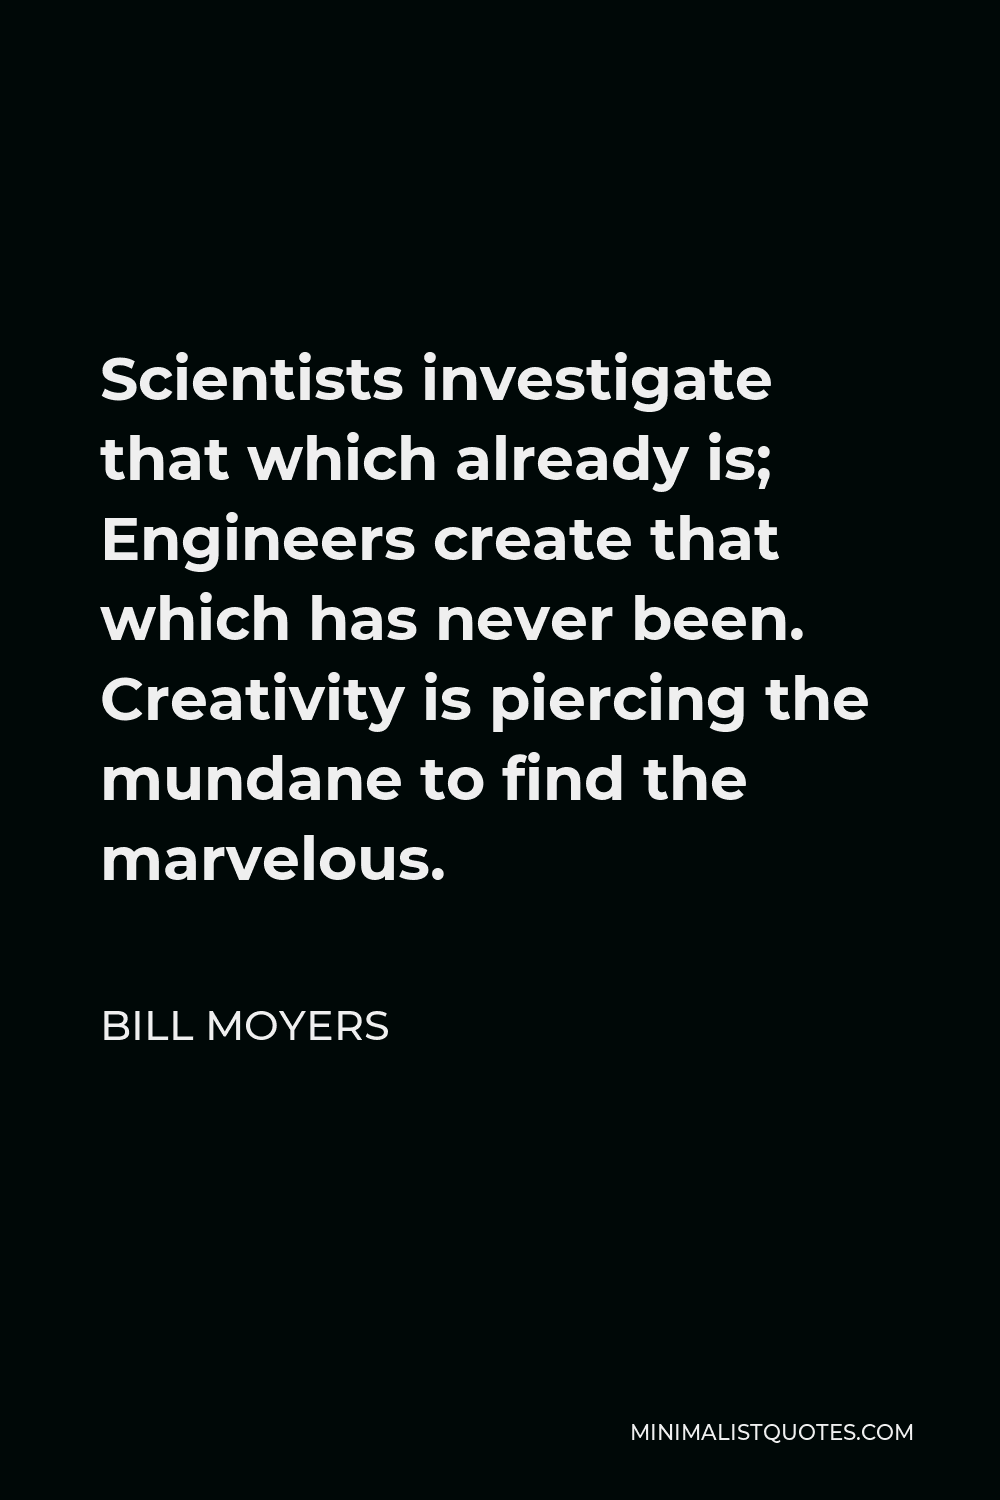 Bill Moyers Quote - Scientists investigate that which already is; Engineers create that which has never been. Creativity is piercing the mundane to find the marvelous.